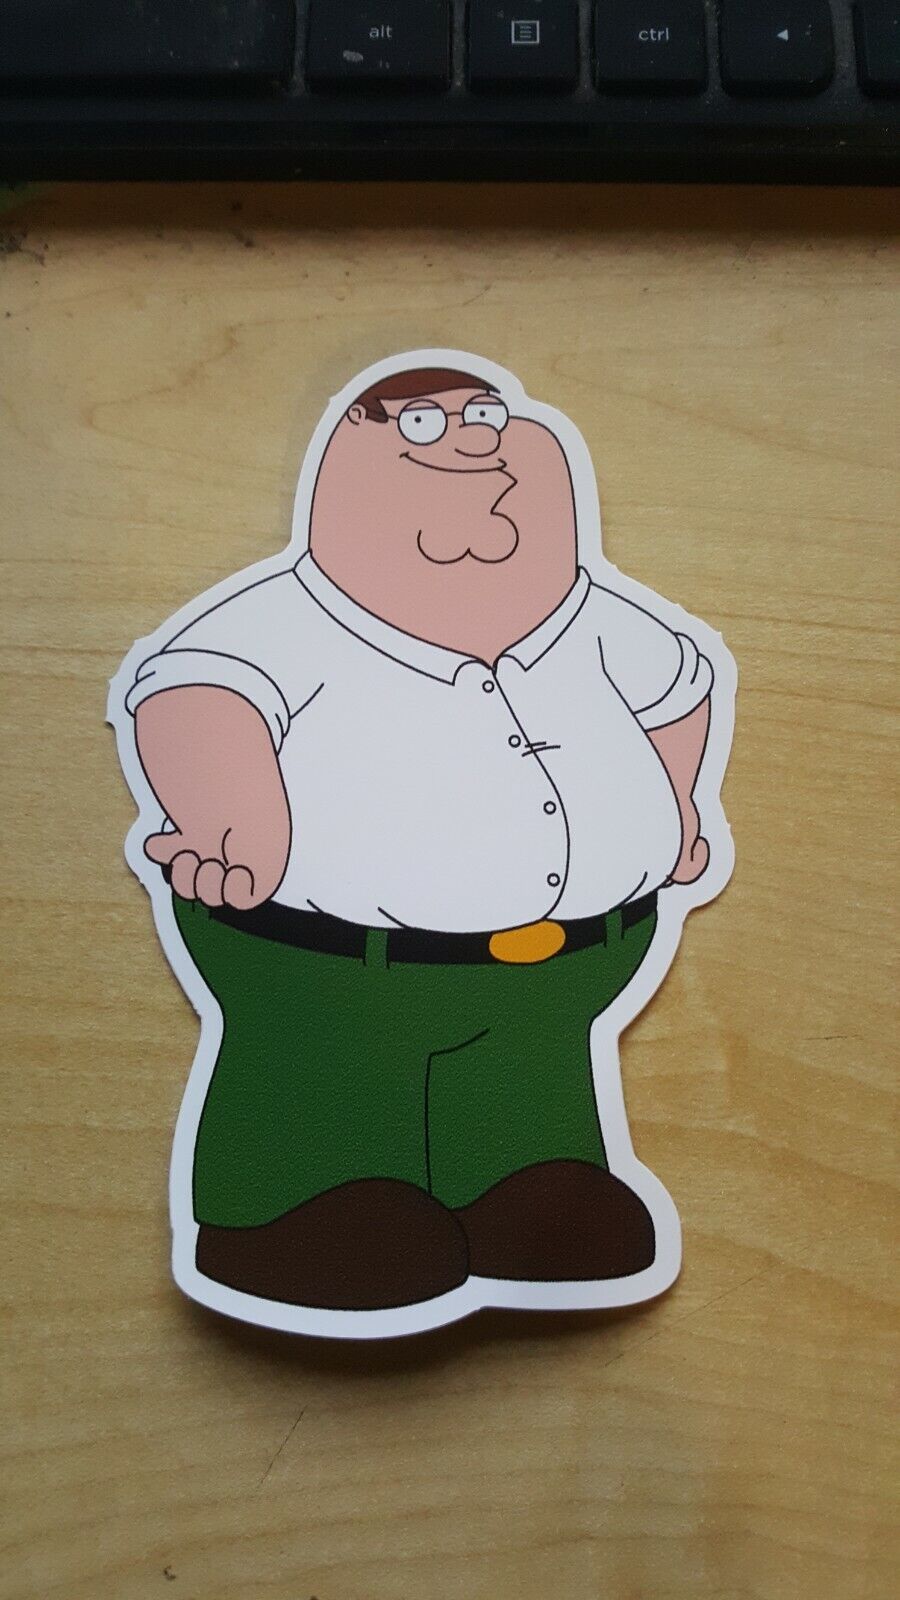 35% OFF PETER GRIFFIN National products STICKER family guy